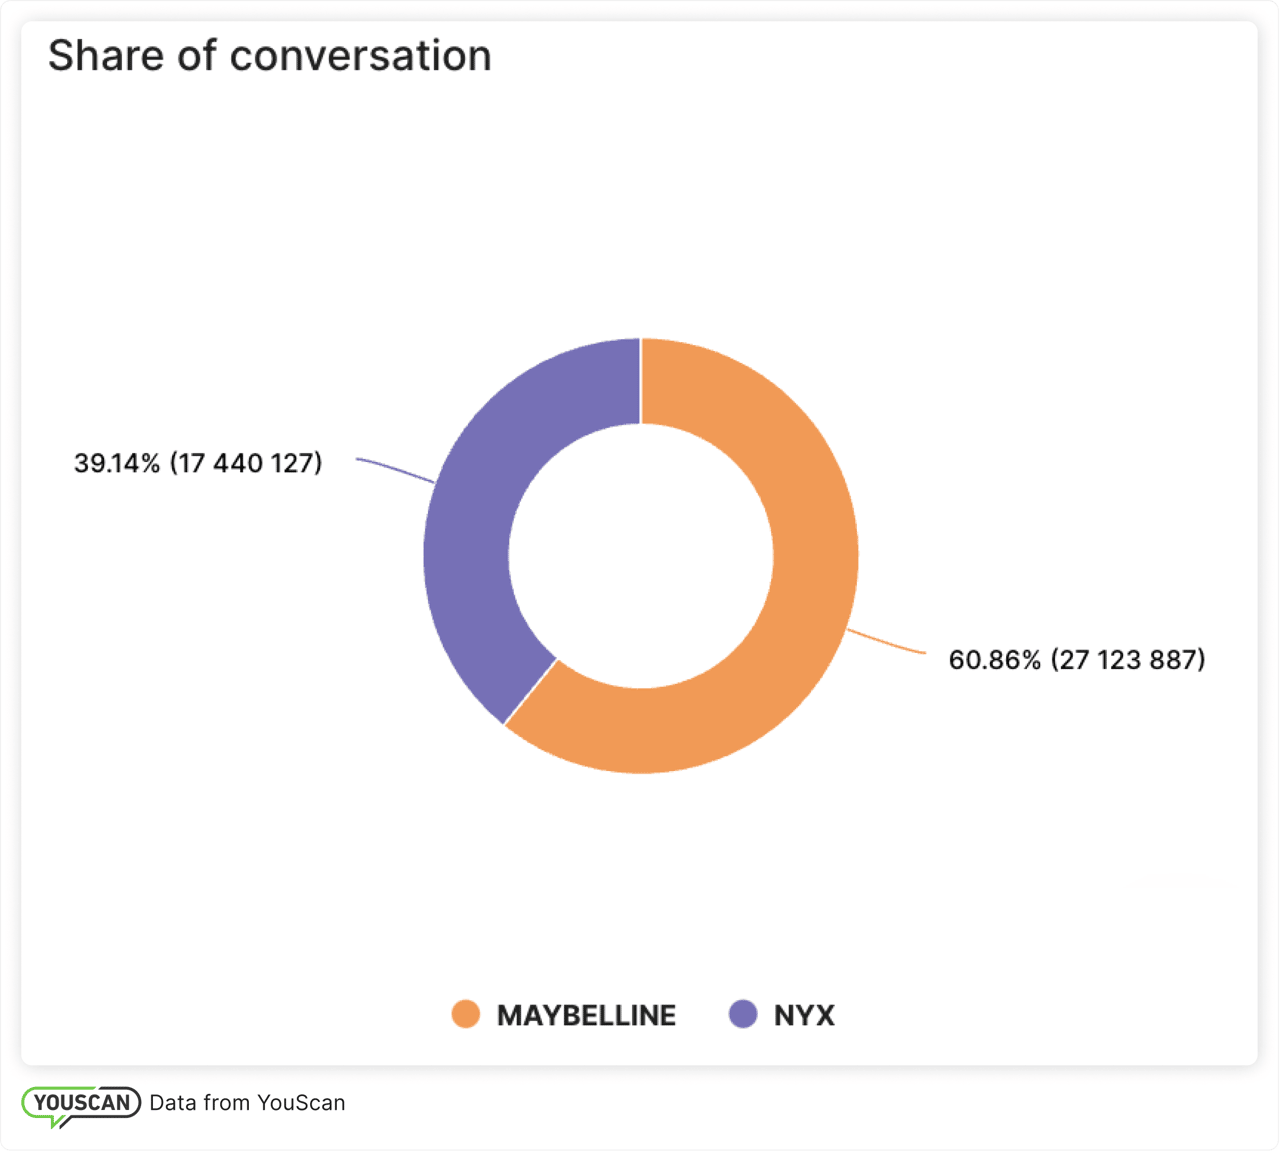 Share of Conversation - Maybelline & NYX